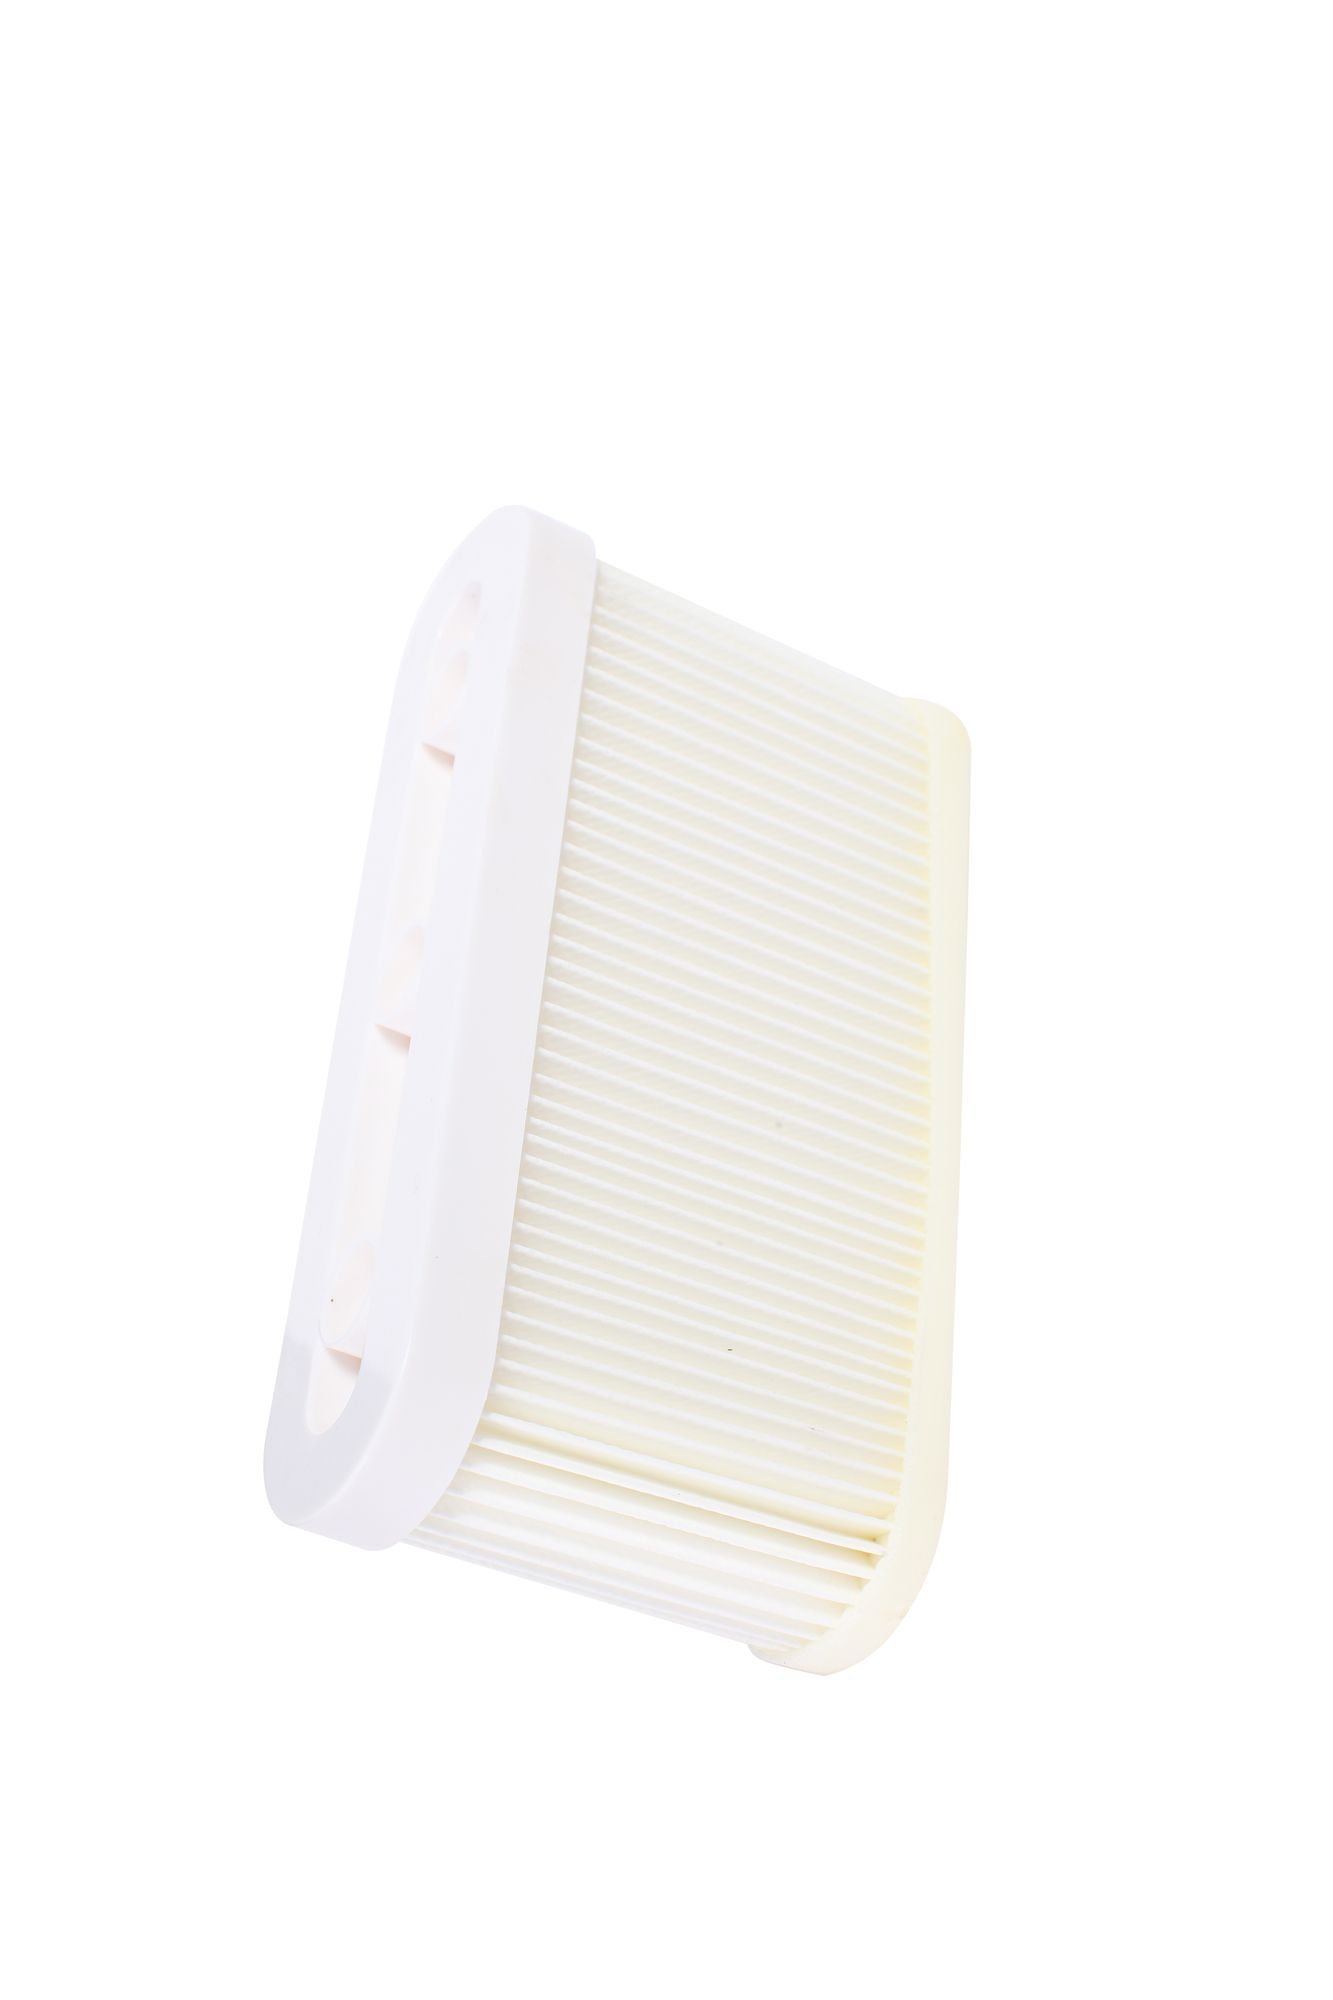 Hepa Filter Pour 7270.0005